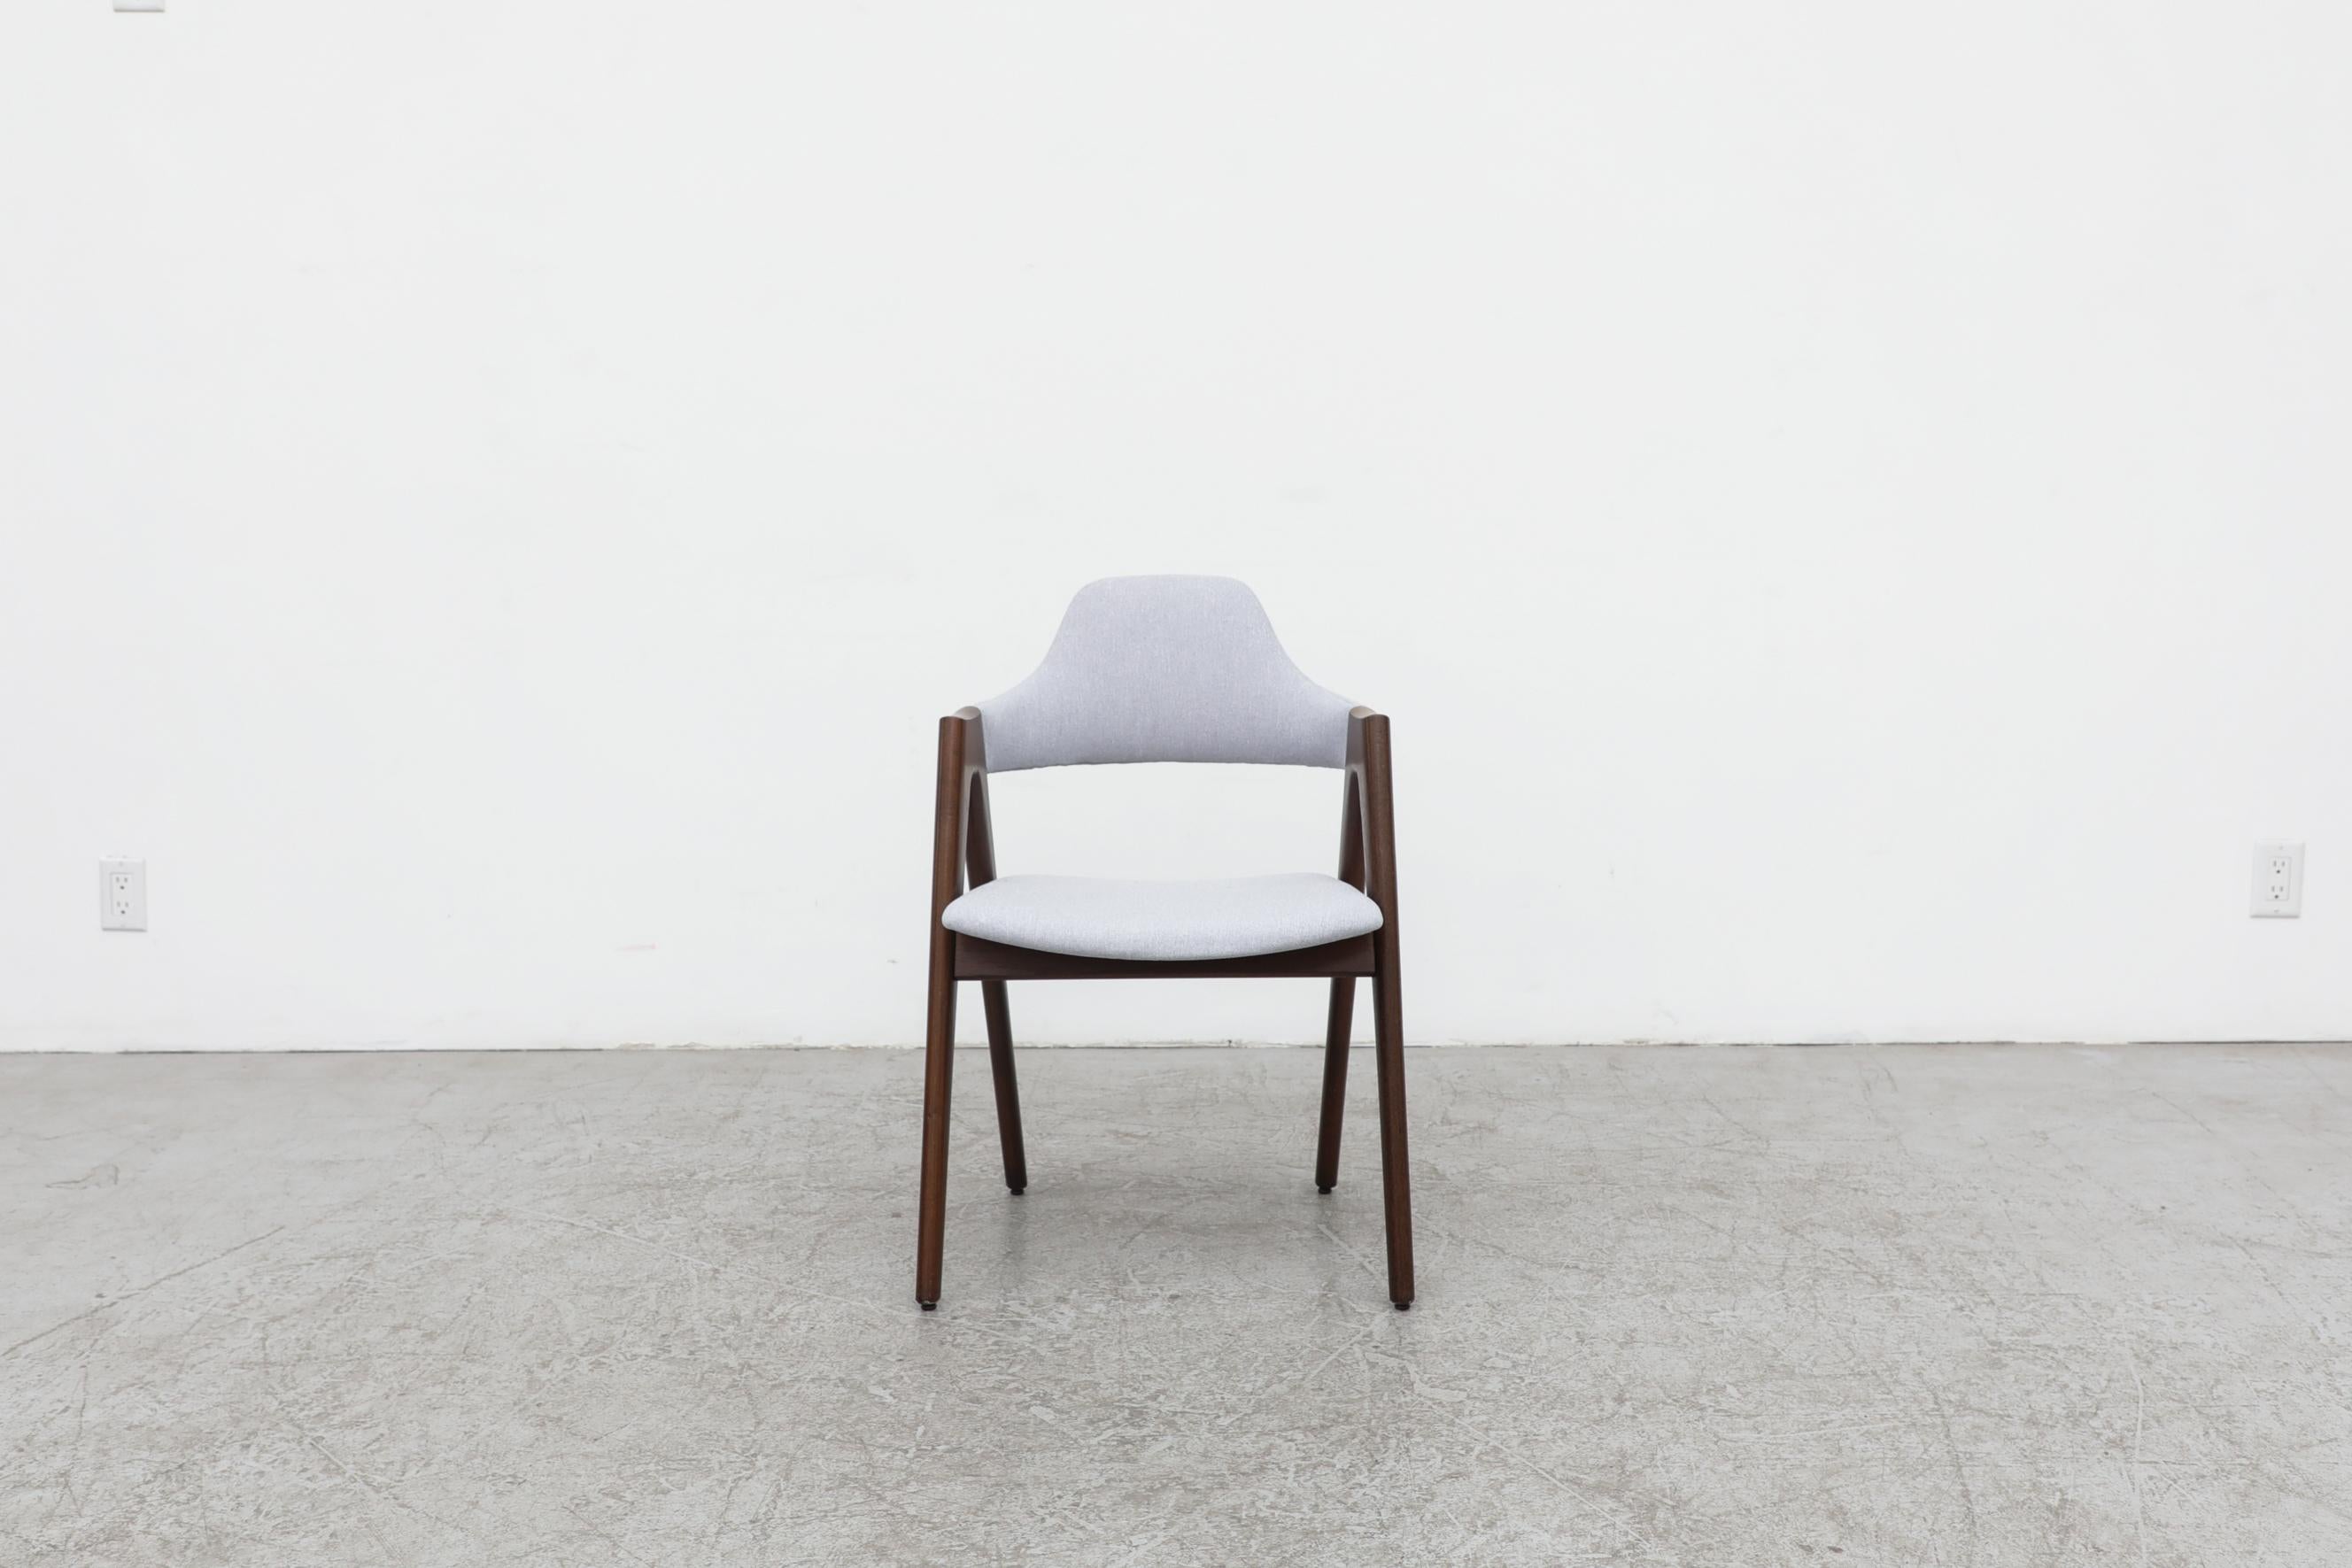 Single Kai Kristiansen Compass chair with light blue upholstery. The Compass Dining Chair / Kompas was designed in 1958 by Kai Kristiansen for SVA Møbler and manufactured in Denmark. In original condition with visible scuffs and chips, particularly